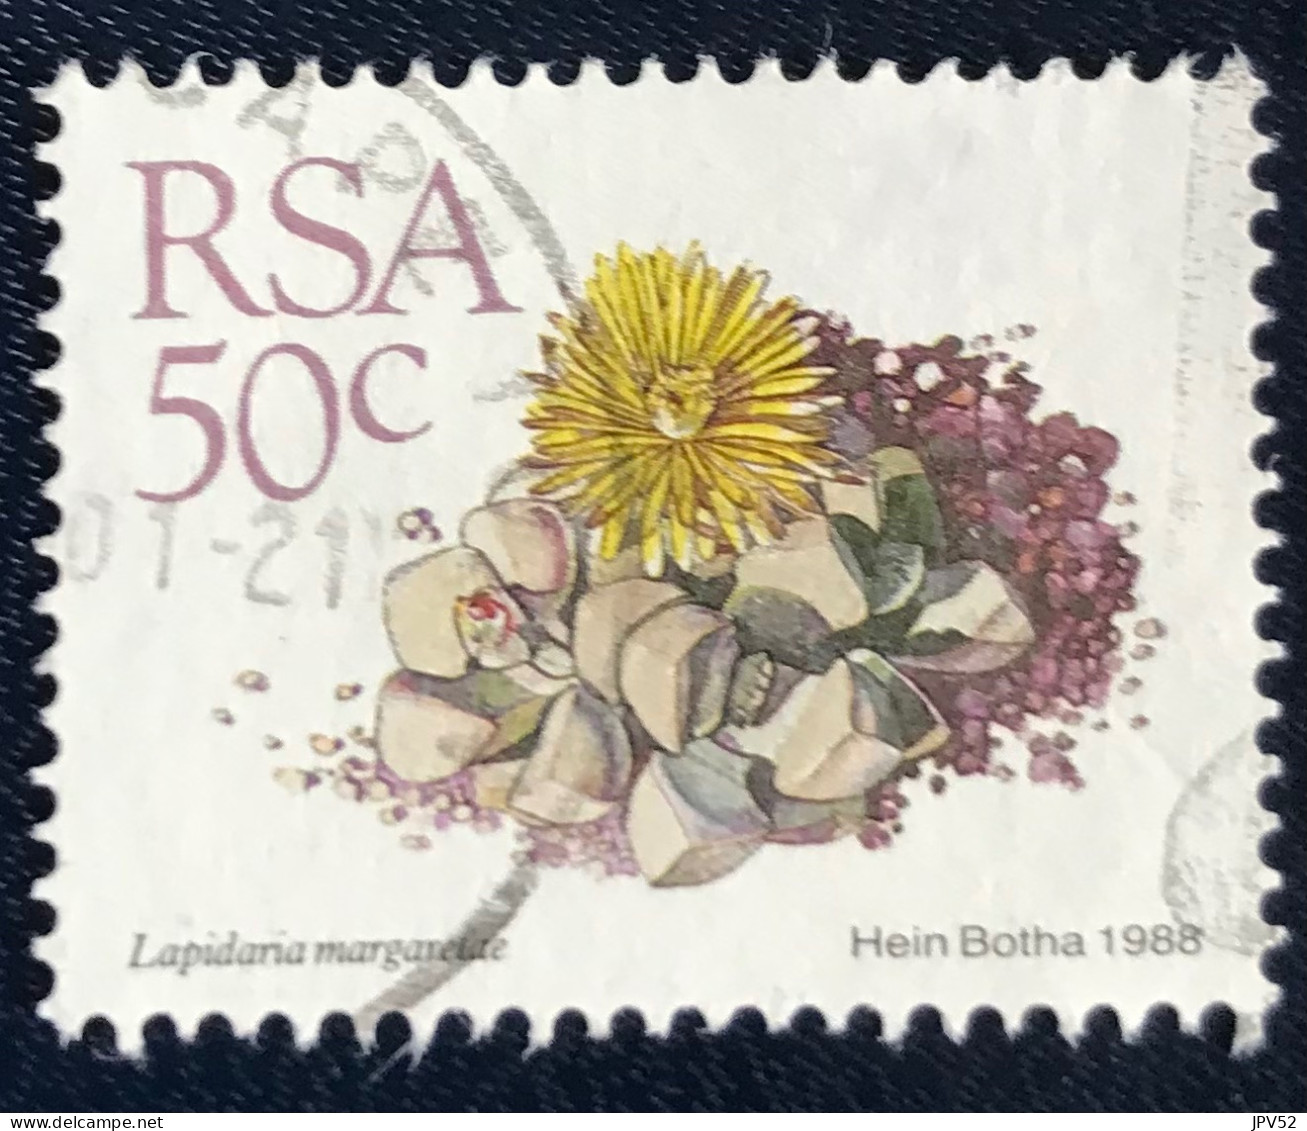 RSA - South Africa - Suid-Afrika  - C18/7 - 1988 - (°)used - Michel 754 - Vetplanten - Used Stamps